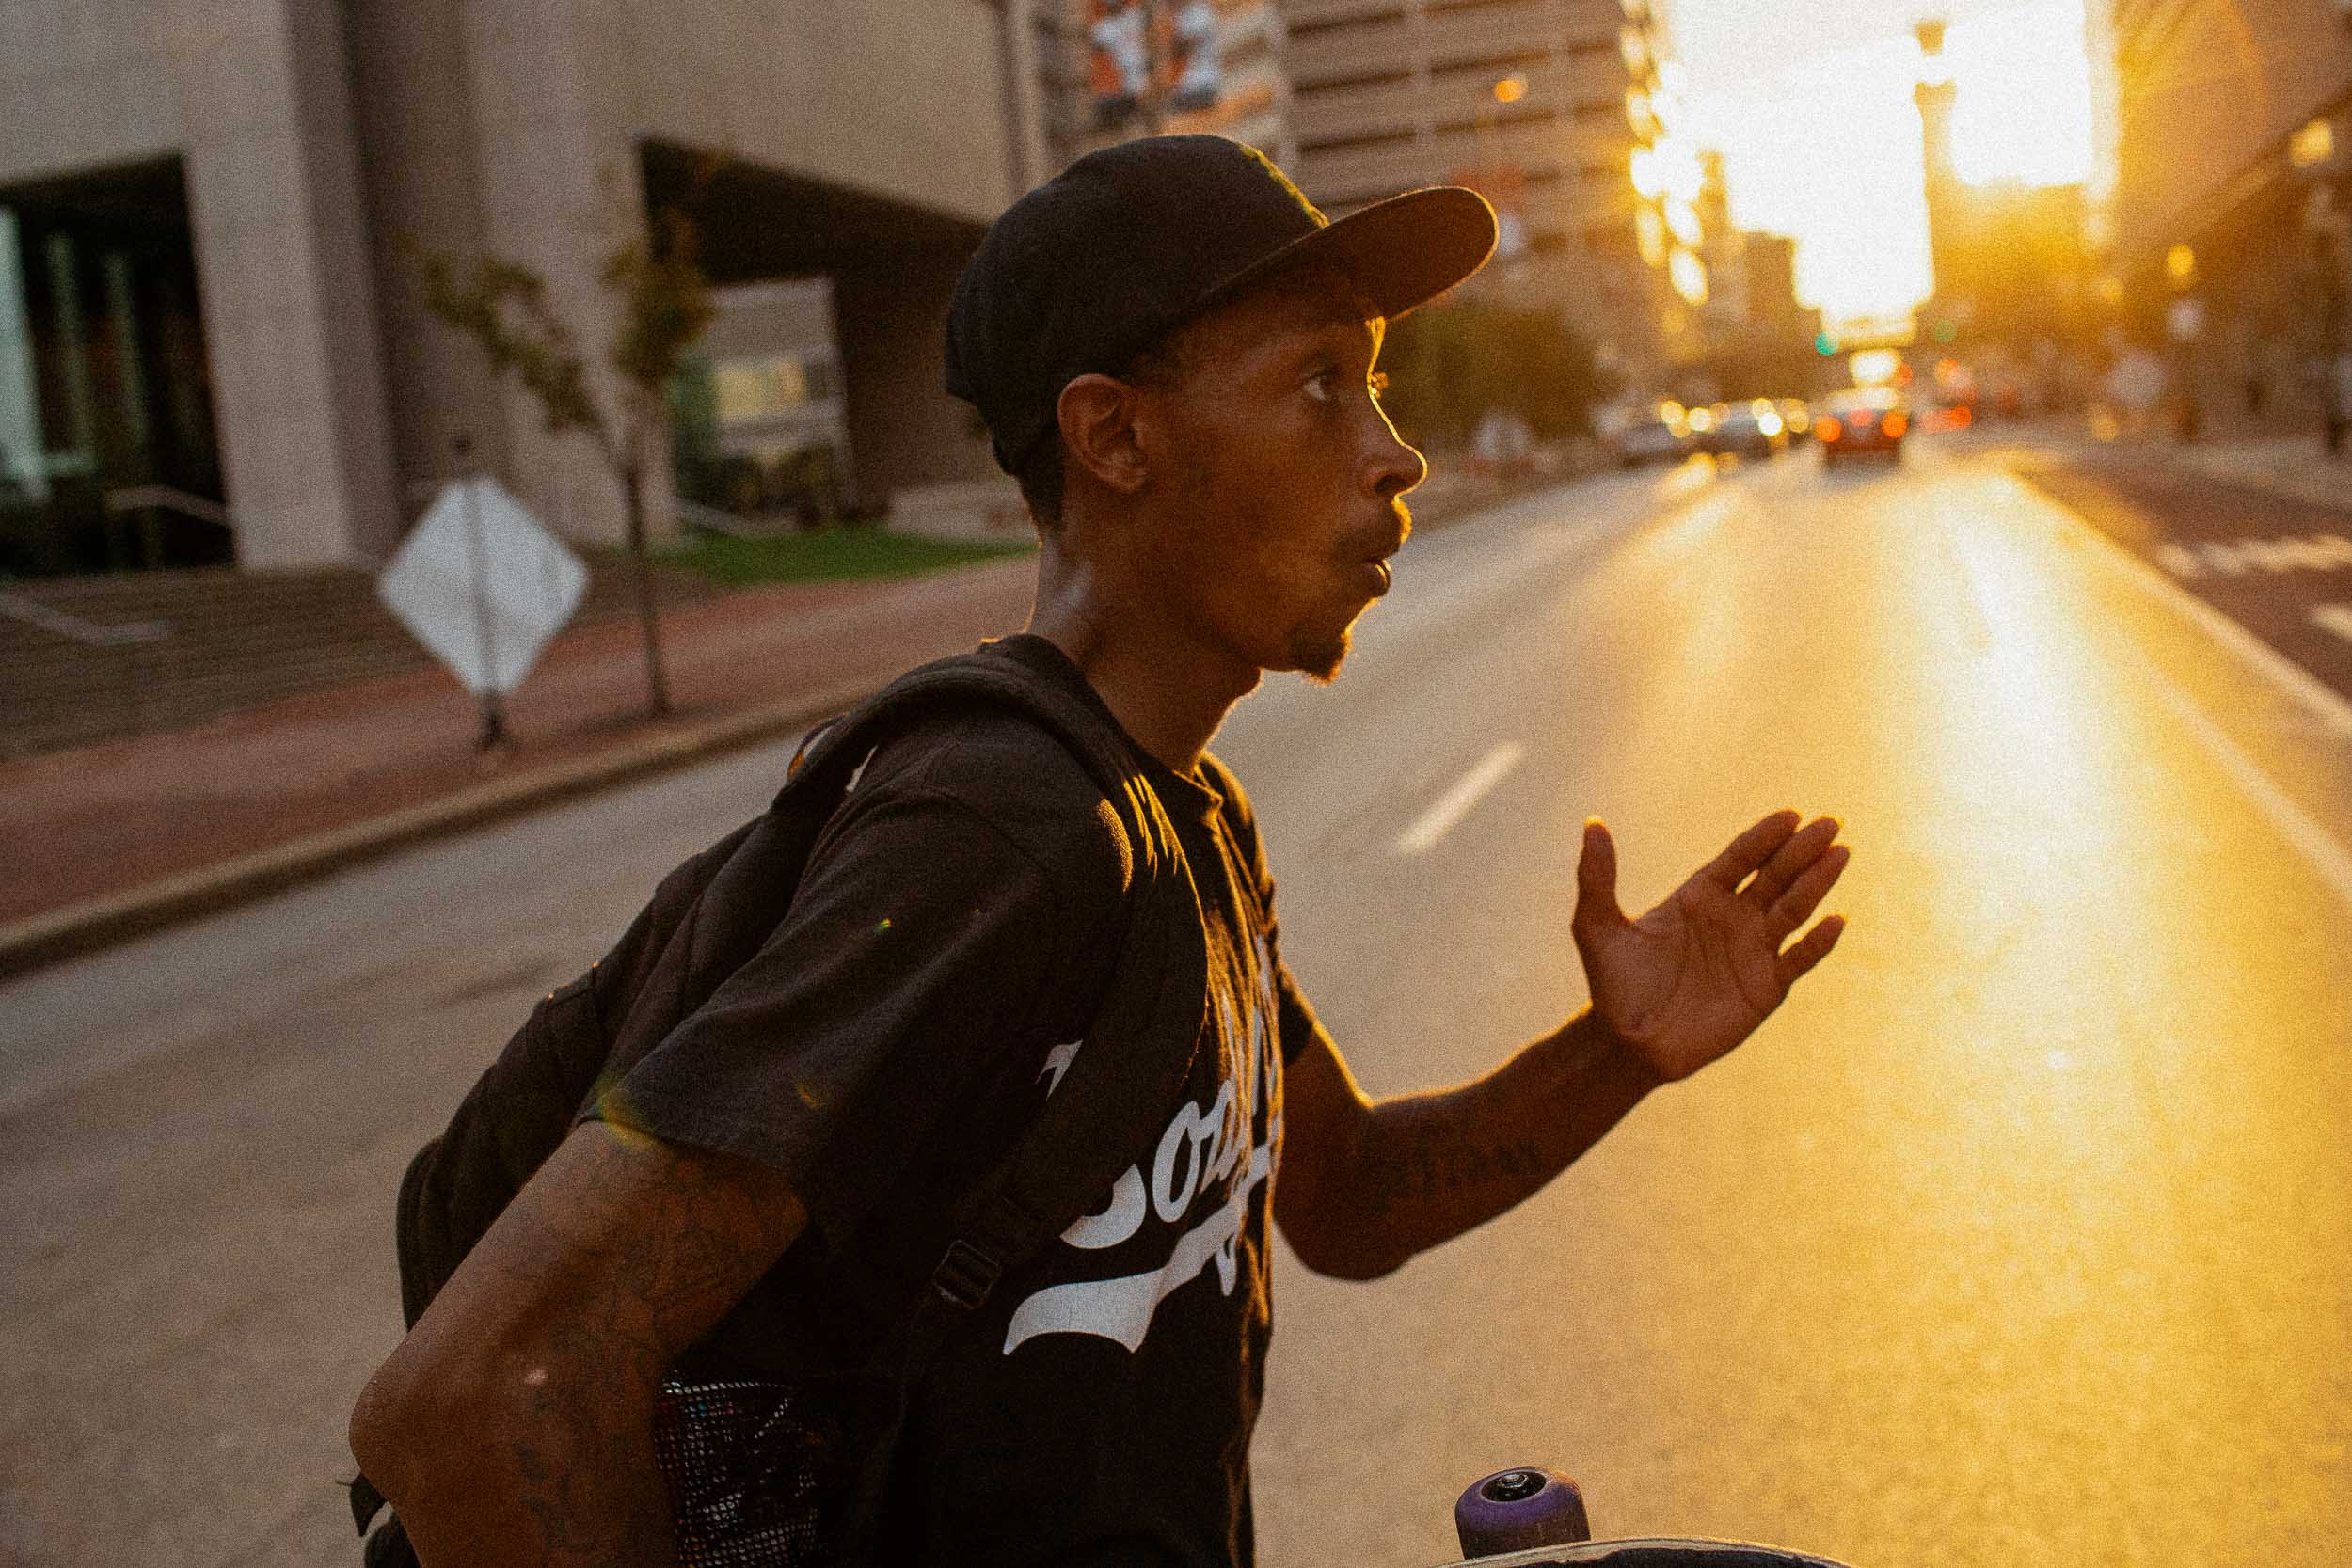 INNER CITY LIFE DOCUMENTARY PHOTOGRAPHER OF URBAN YOUTH SKATEBOARDING CULTURE PHOTOGRAPHY BASED IN BALTIMORE WASHINGTON DC